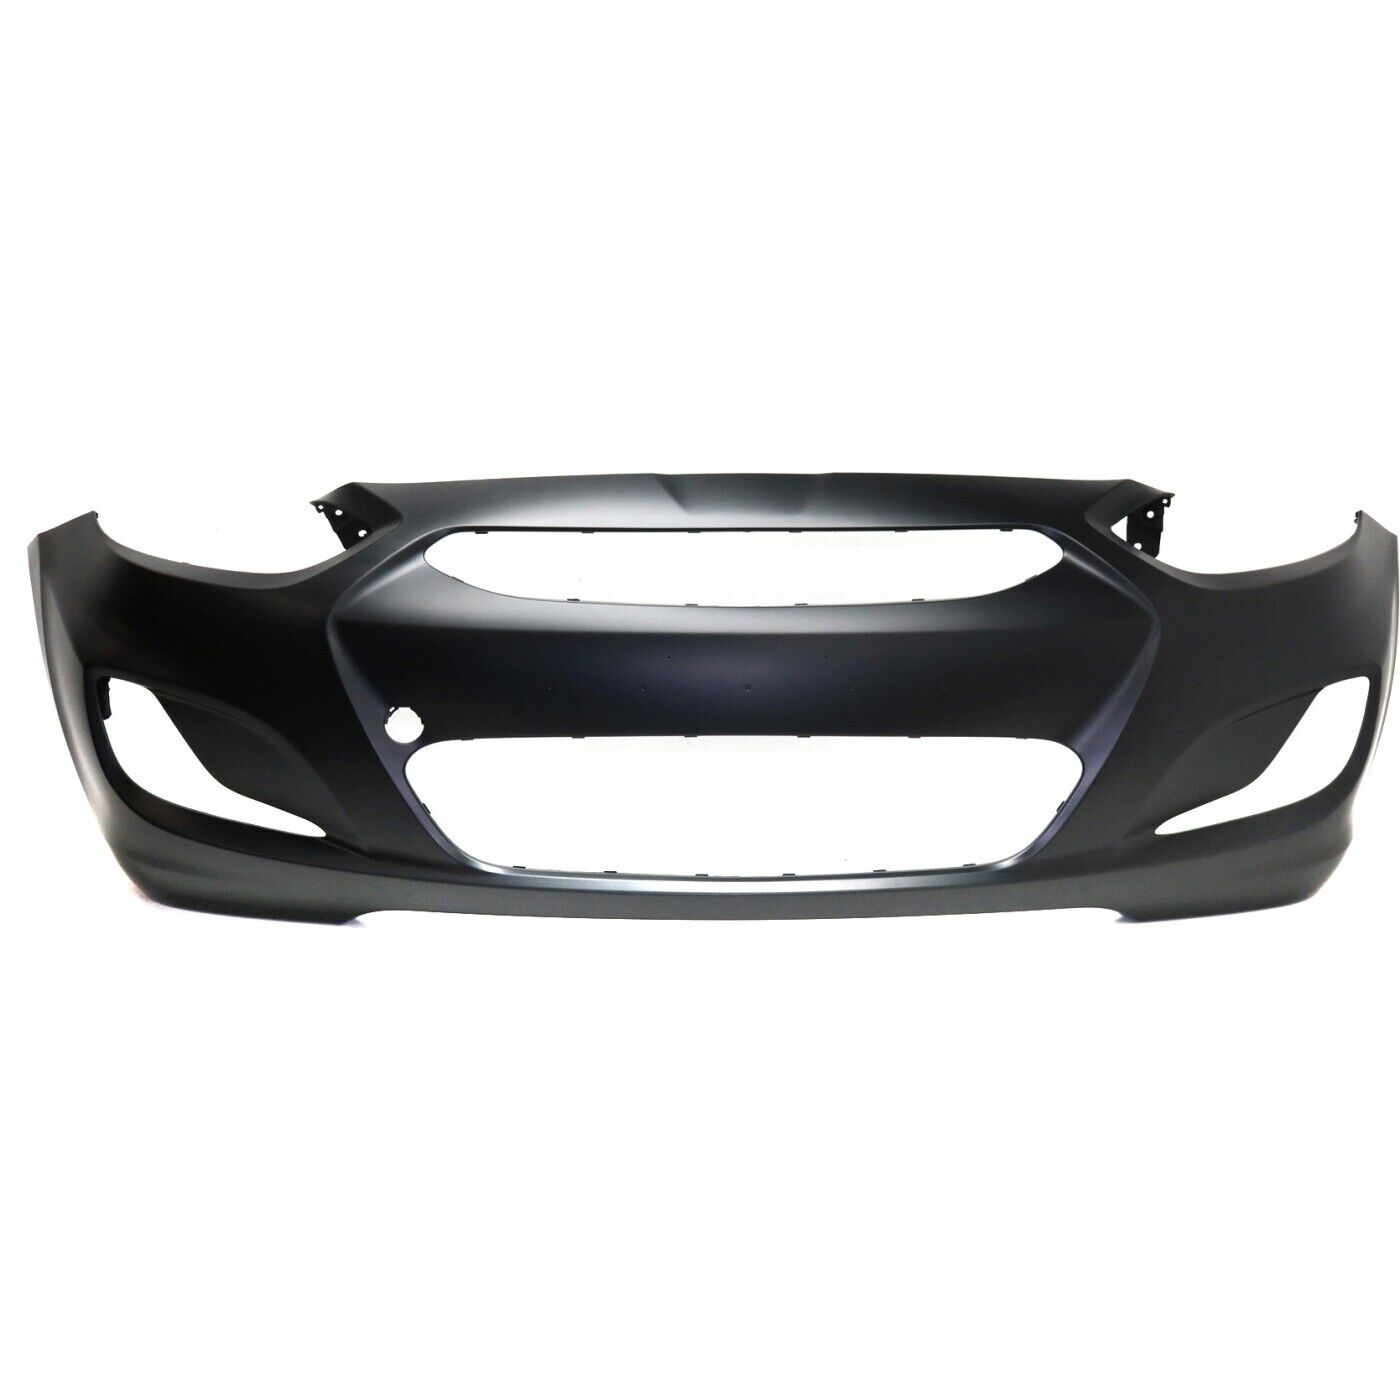 Front Bumper Cover Primed For 2014-2017 Hyundai Accent From 10/15/2013